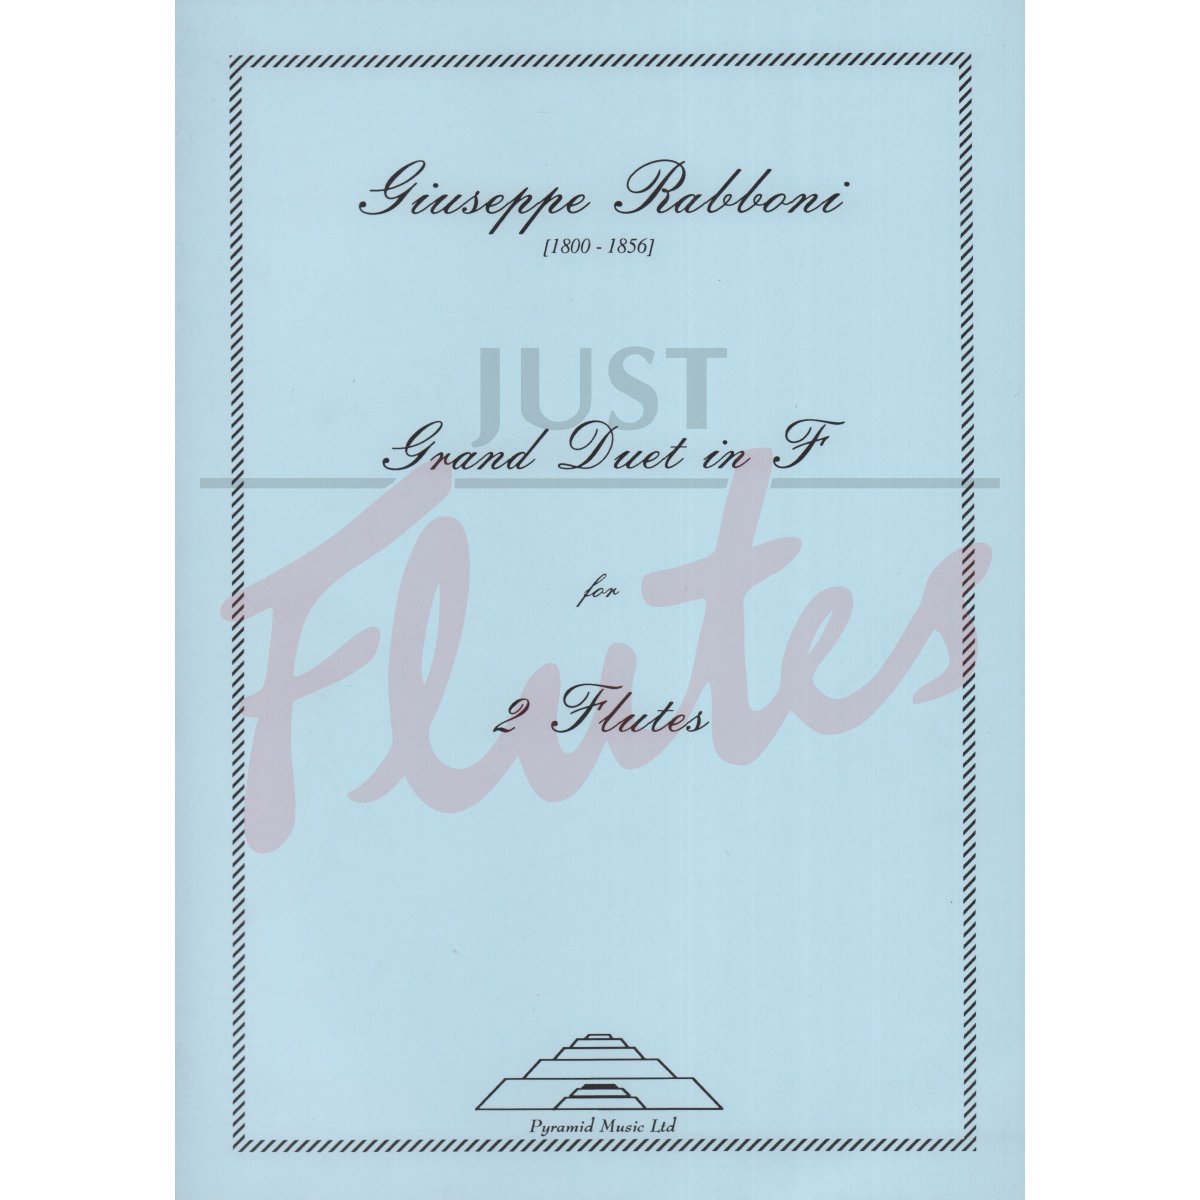 Grand Duet in F major for Two Flutes